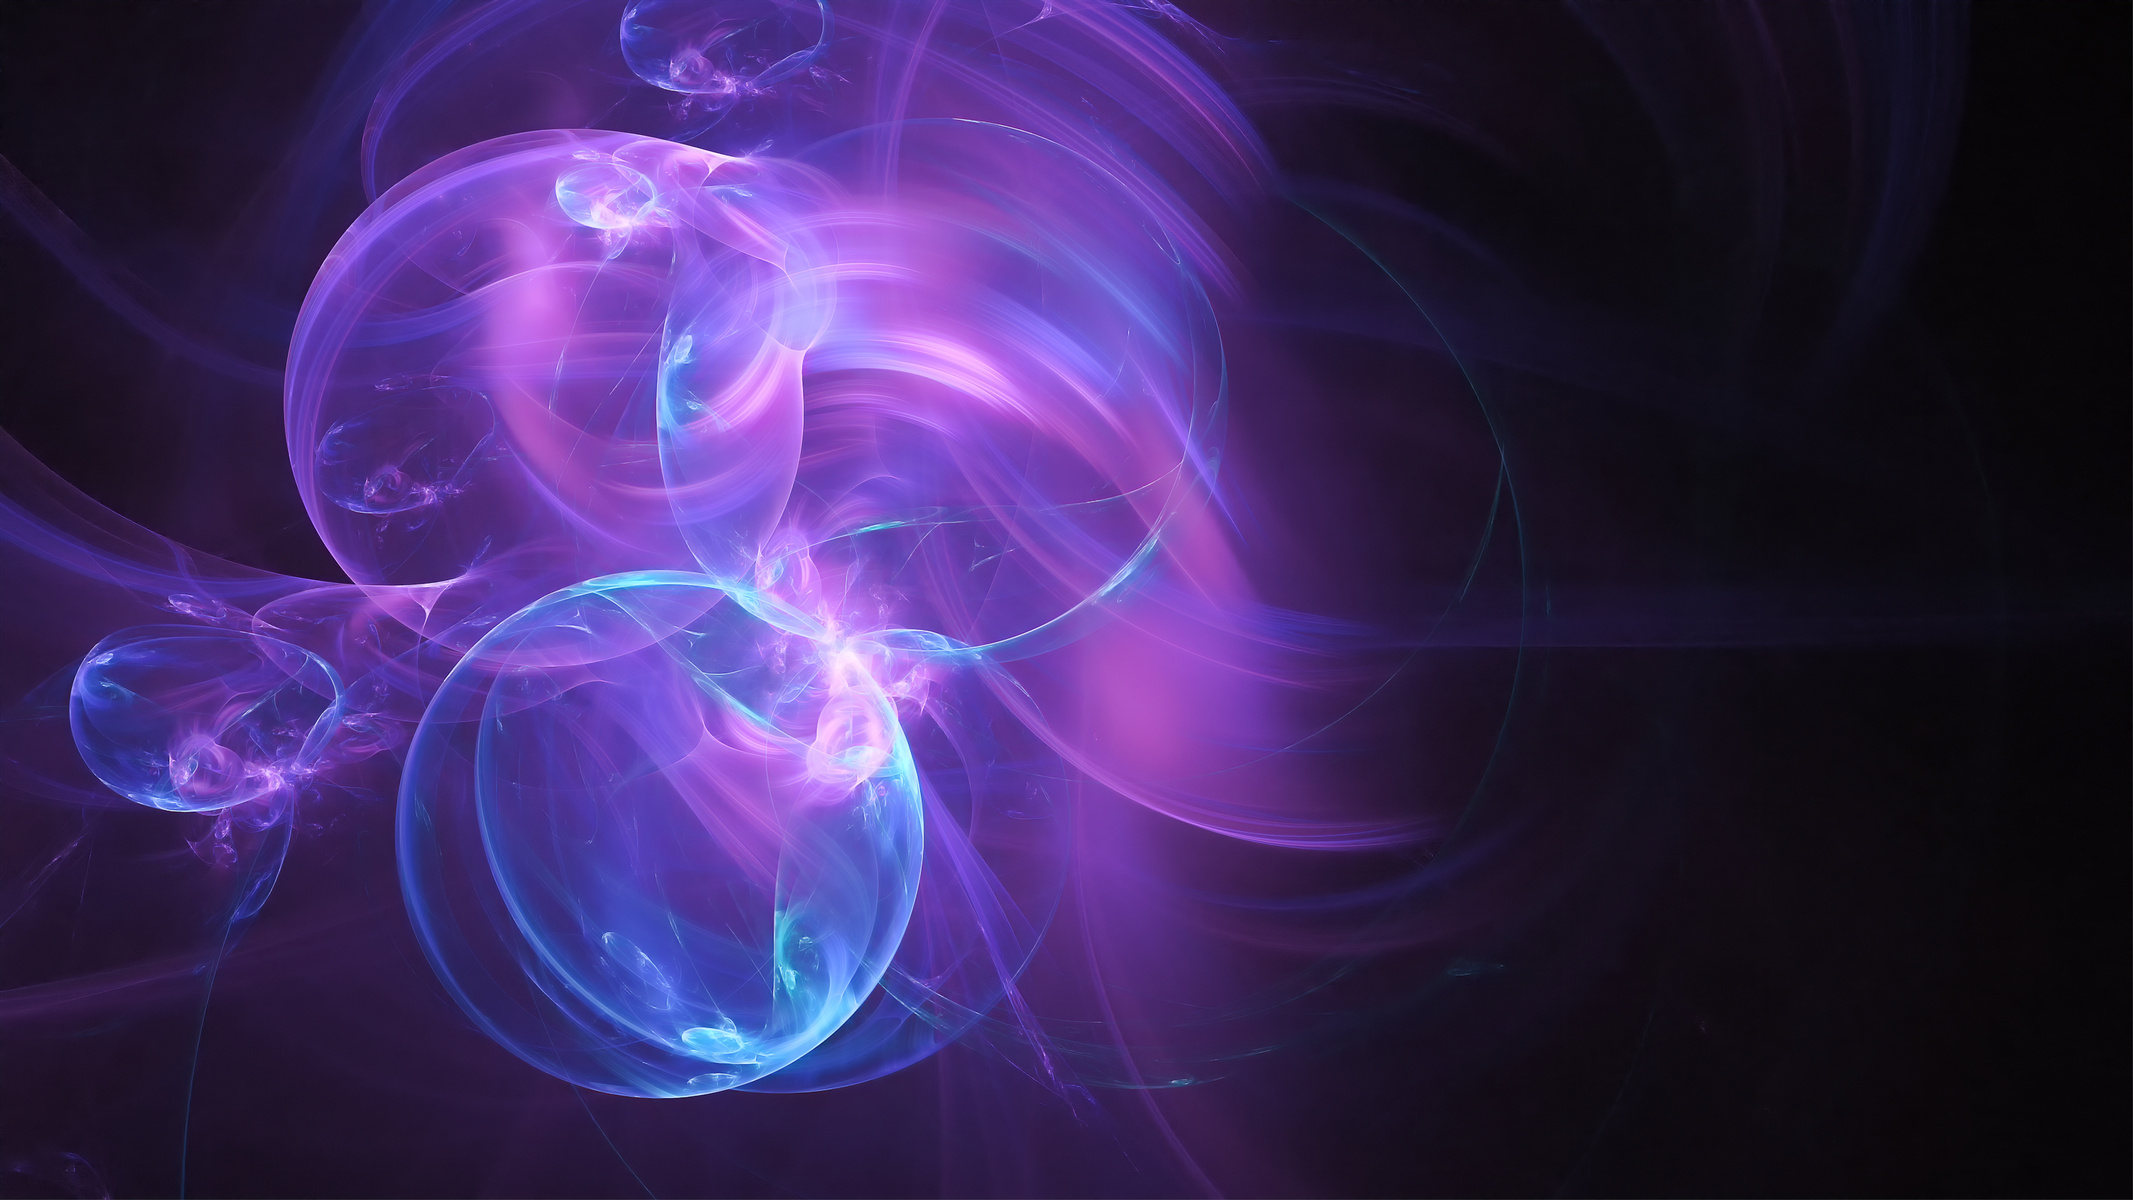 Abstract Creative Fractal Fantasy Background